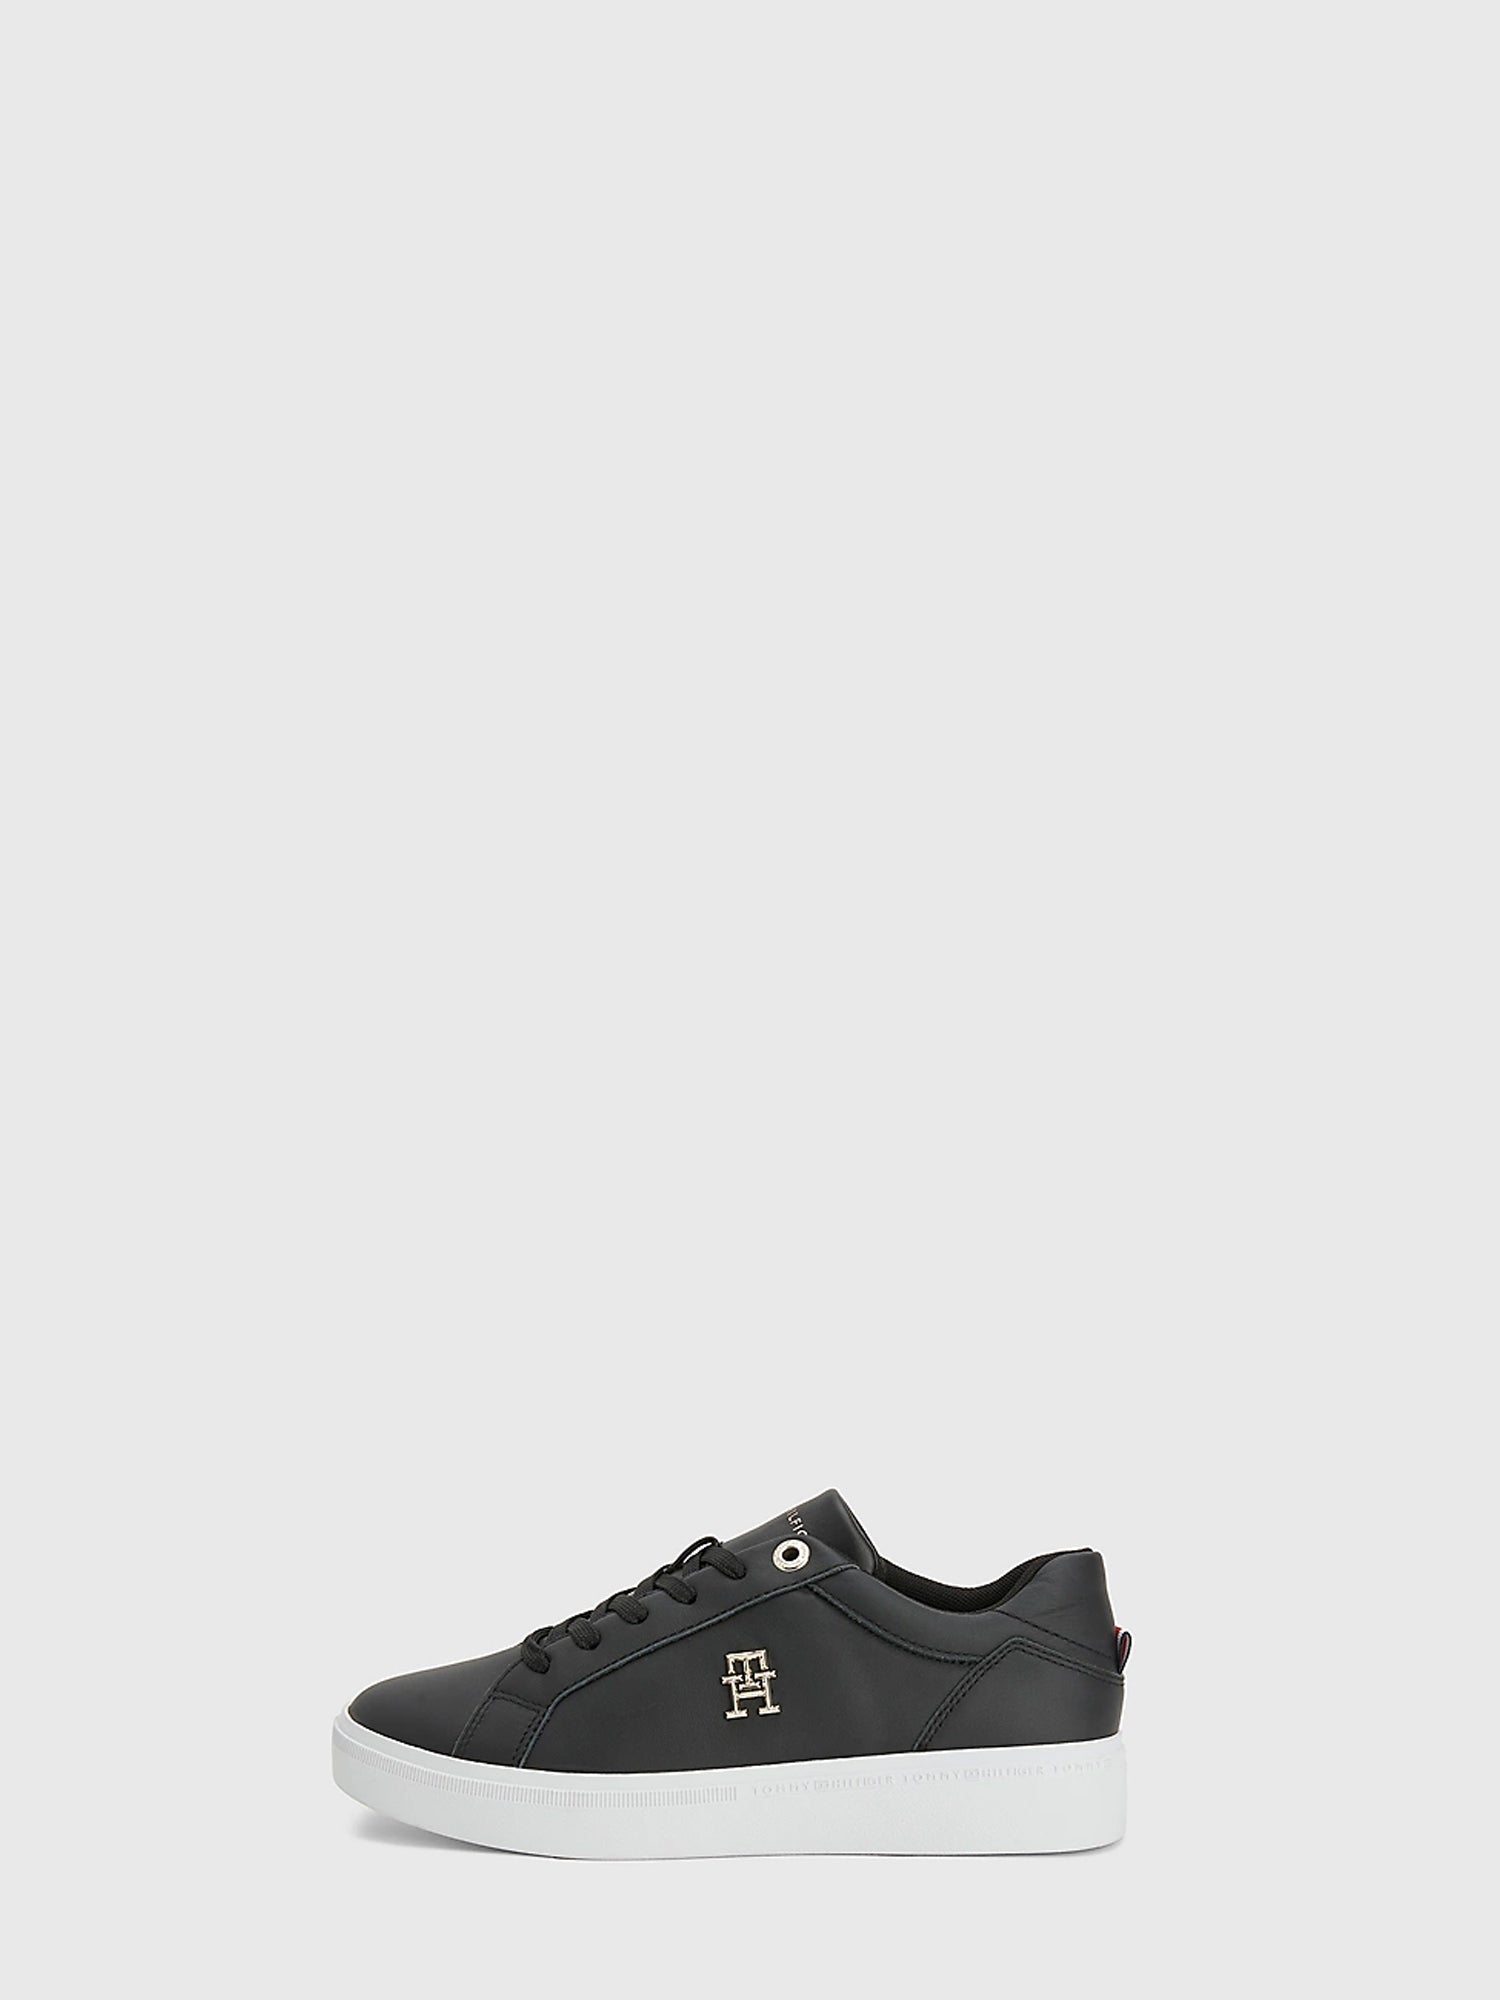 TOMMY HILFIGER SHOES SNEAKERS COURT NERO